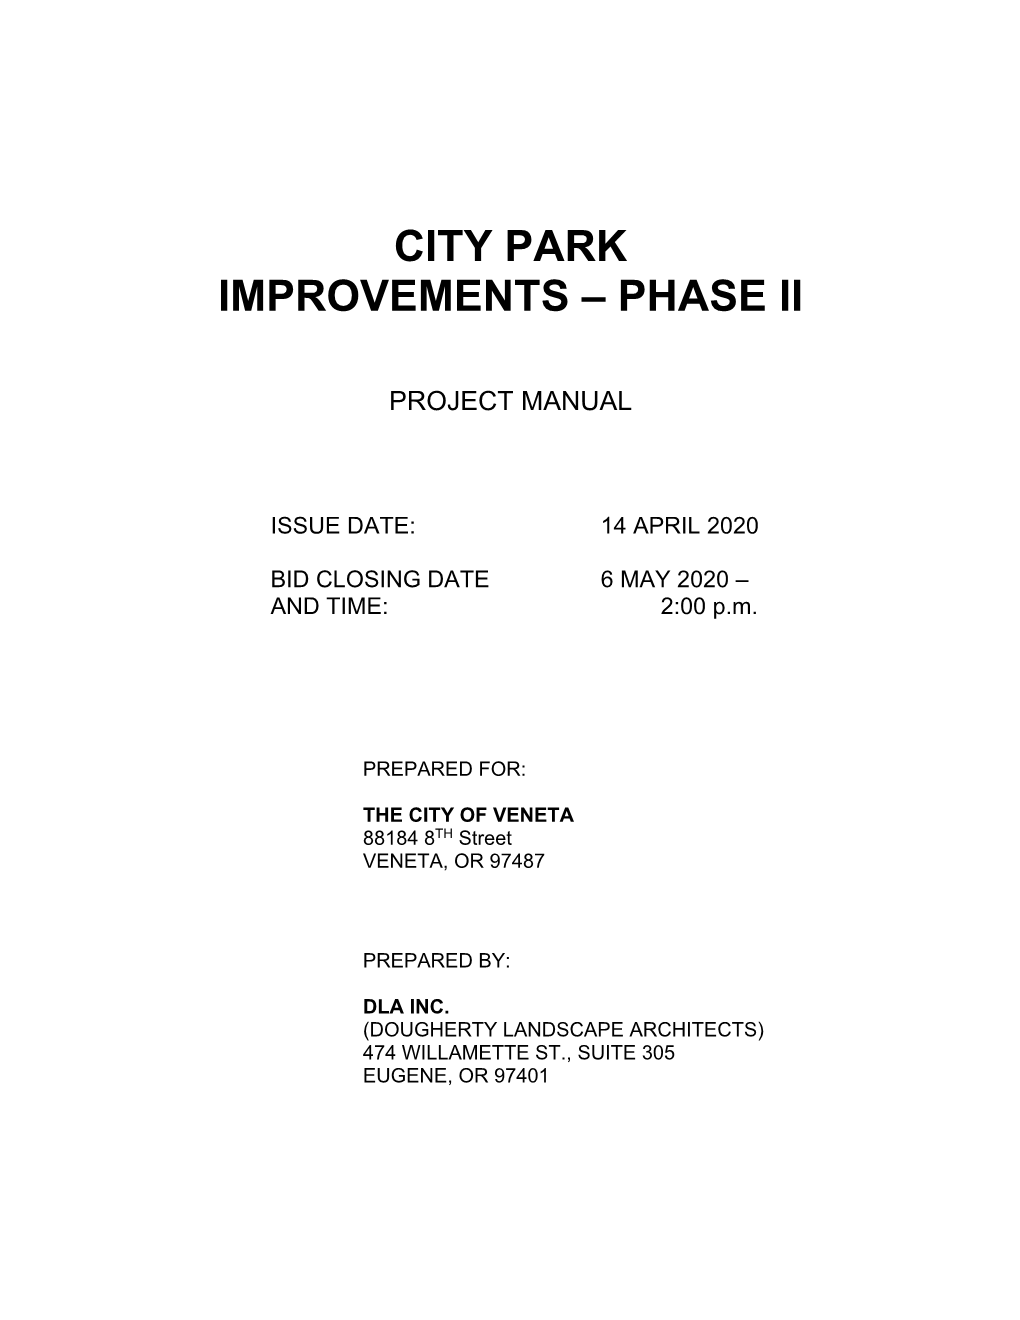 City Park Phase II Project Manual